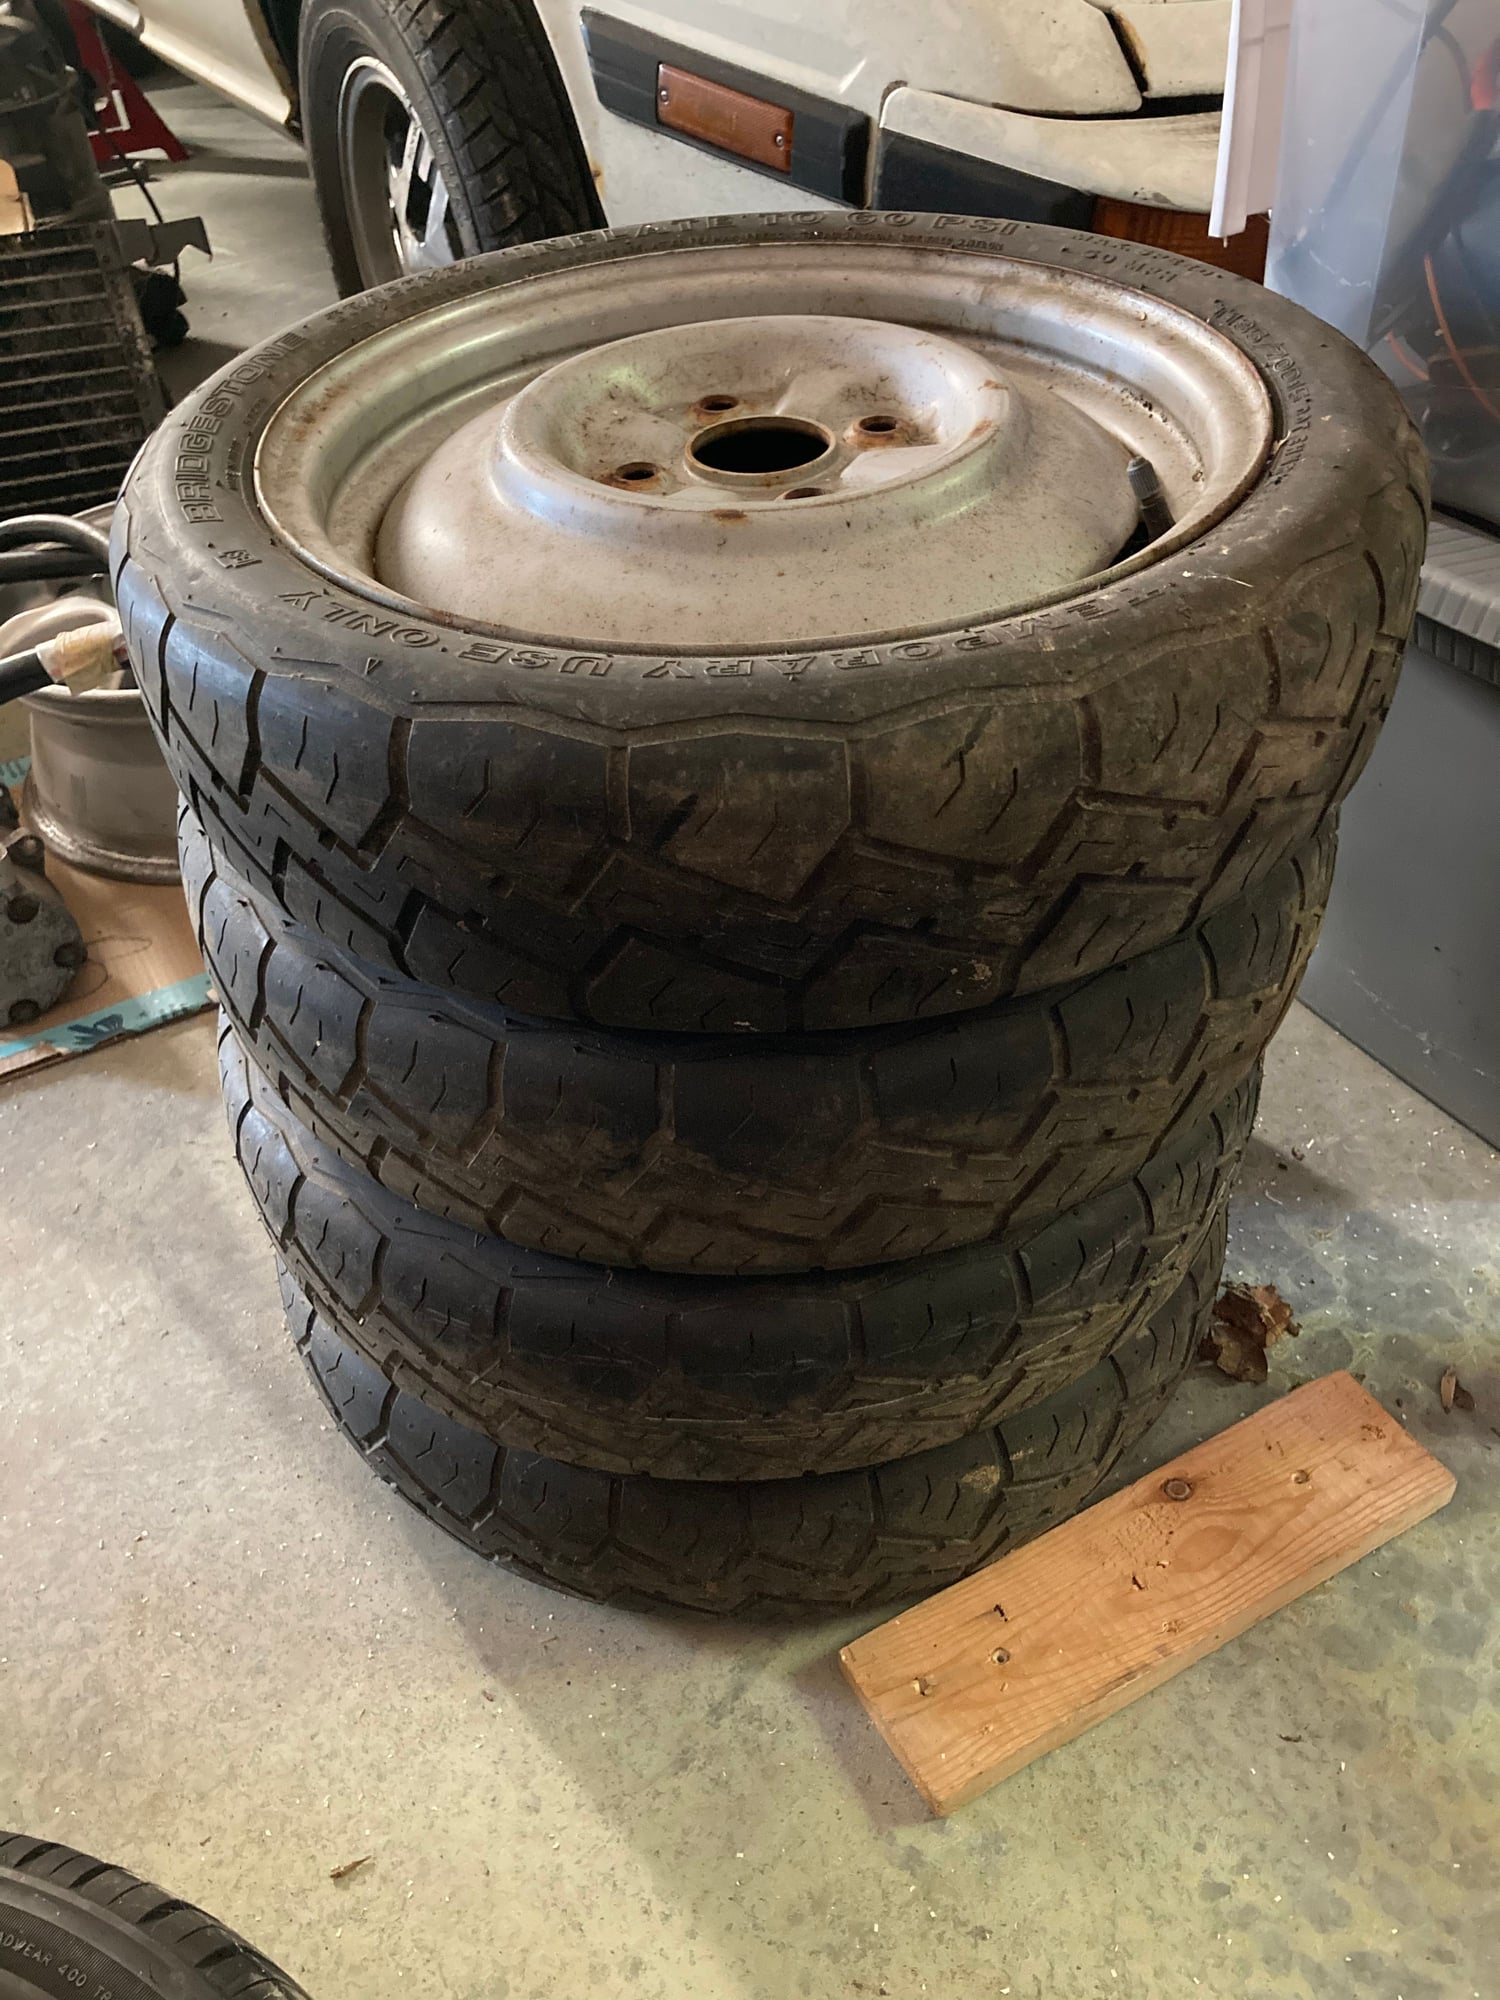 1982 Mazda RX-7 - Spare Donut - Wheels and Tires/Axles - $1,234 - Boonton, NJ 07885, United States